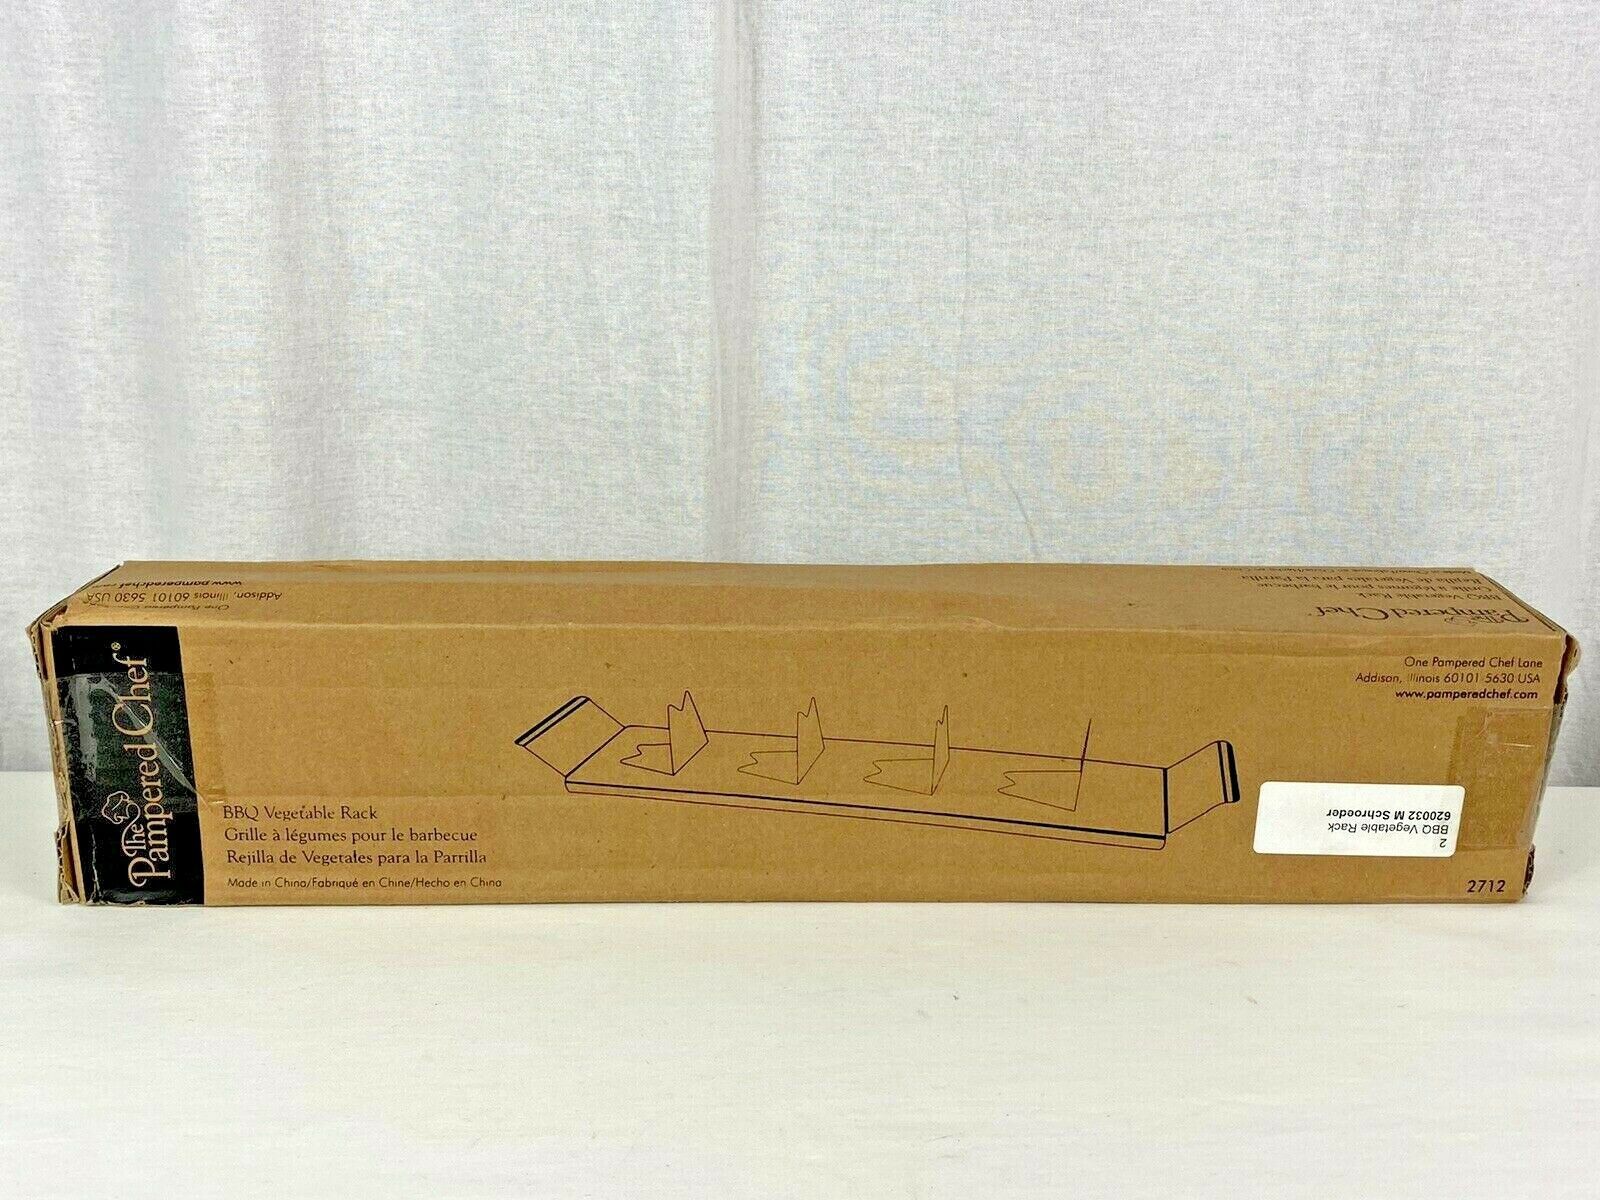 NEW / NIB The Pampered Chef BBQ Vegetable Rack #2712 For On Grill - $4.95